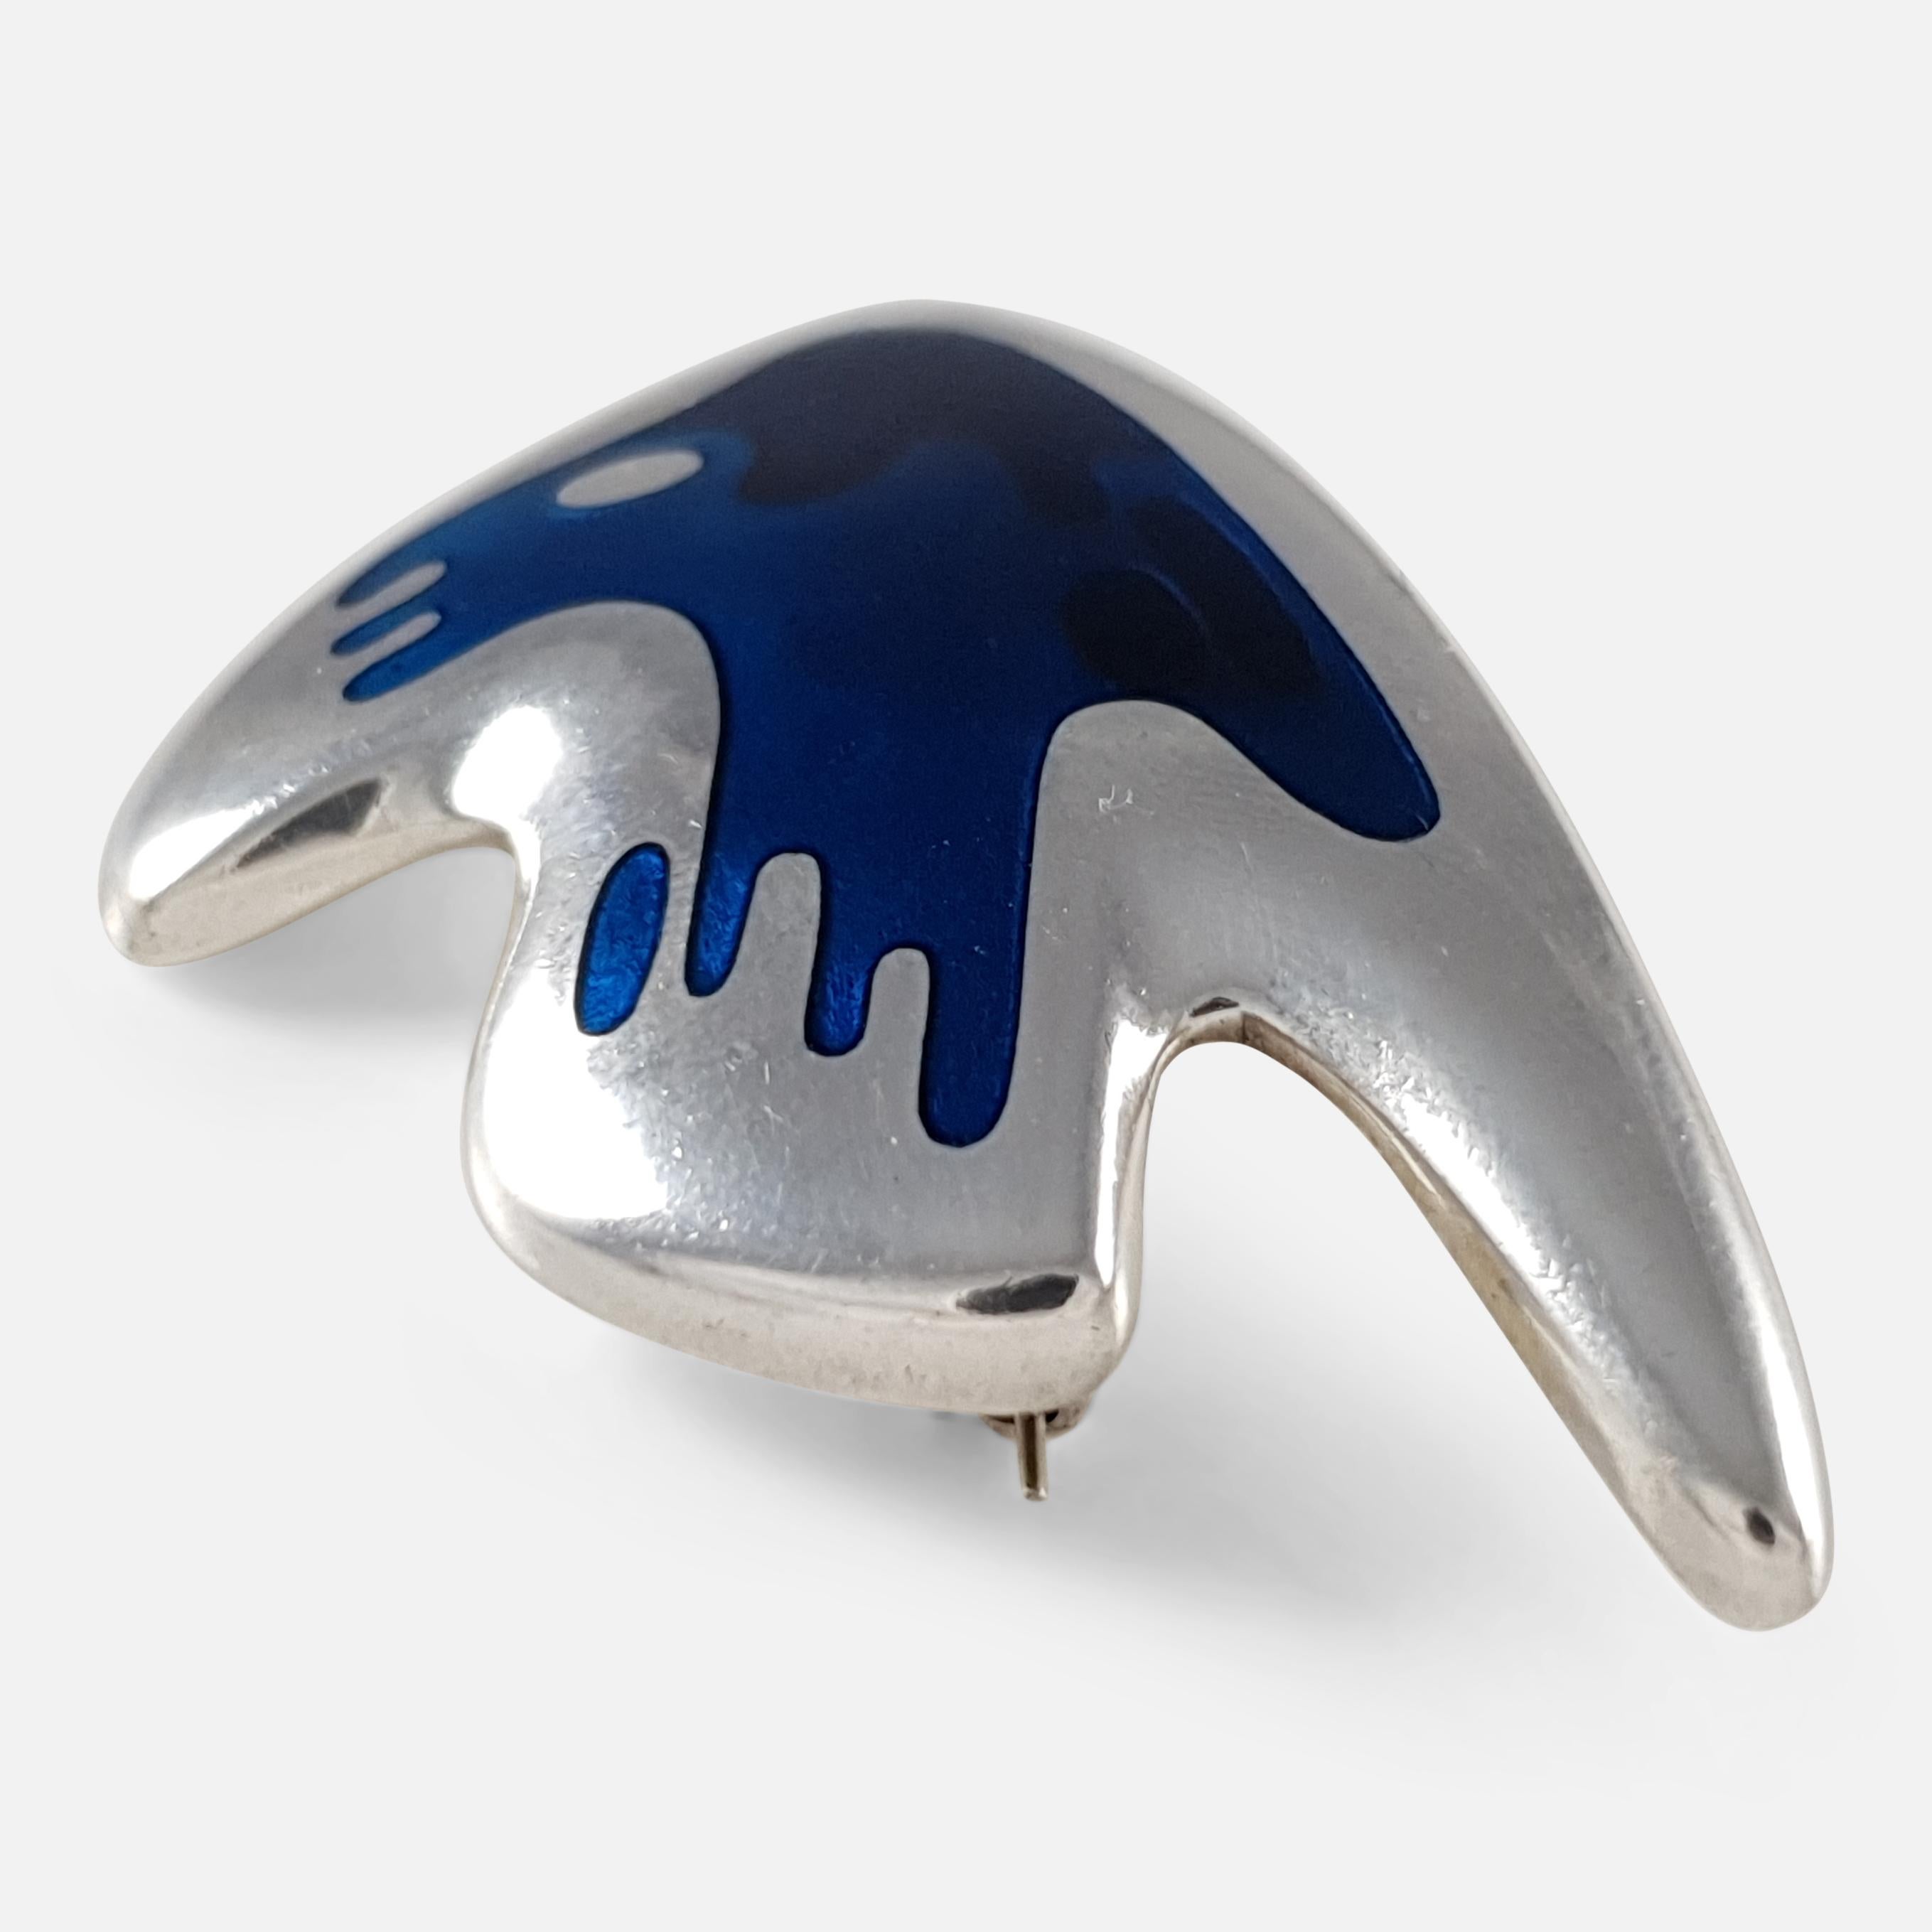 Description: - A superb mid 20th century Georg Jensen sterling silver and blue enamel brooch #307, designed by Henning Koppel. The brooch is stamped Georg Jensen within dotted oval mark, 'STERLING DENMARK', '307', and 'HK'. The brooch is hallmarked